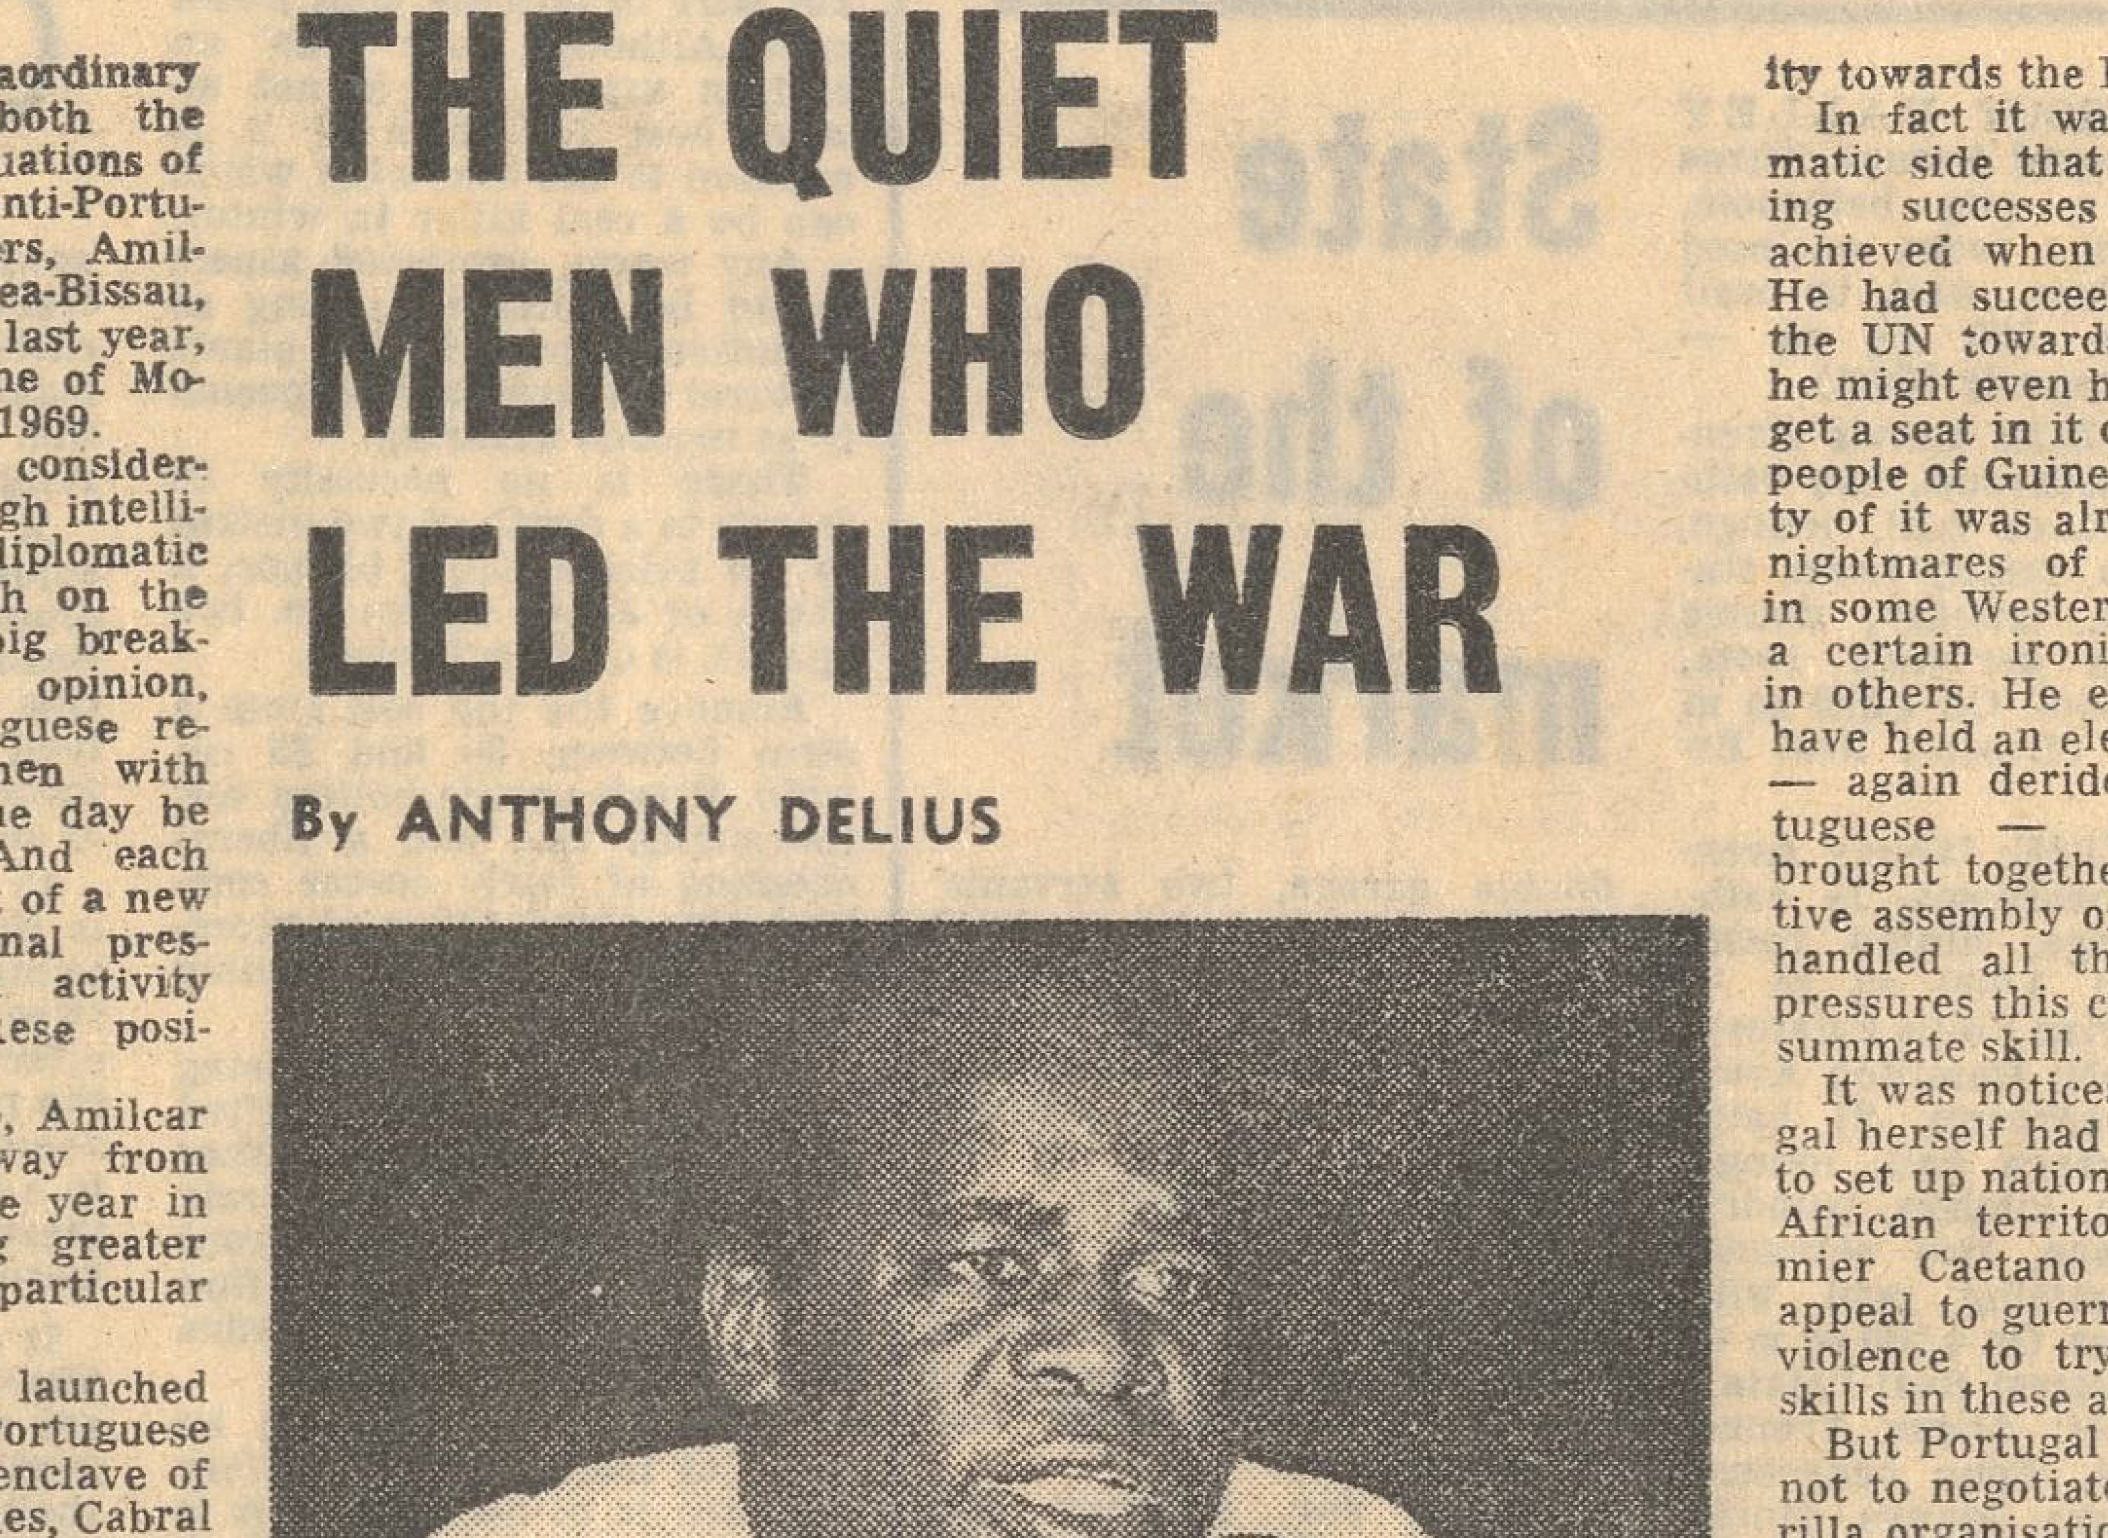 "The quiet man who led the war"